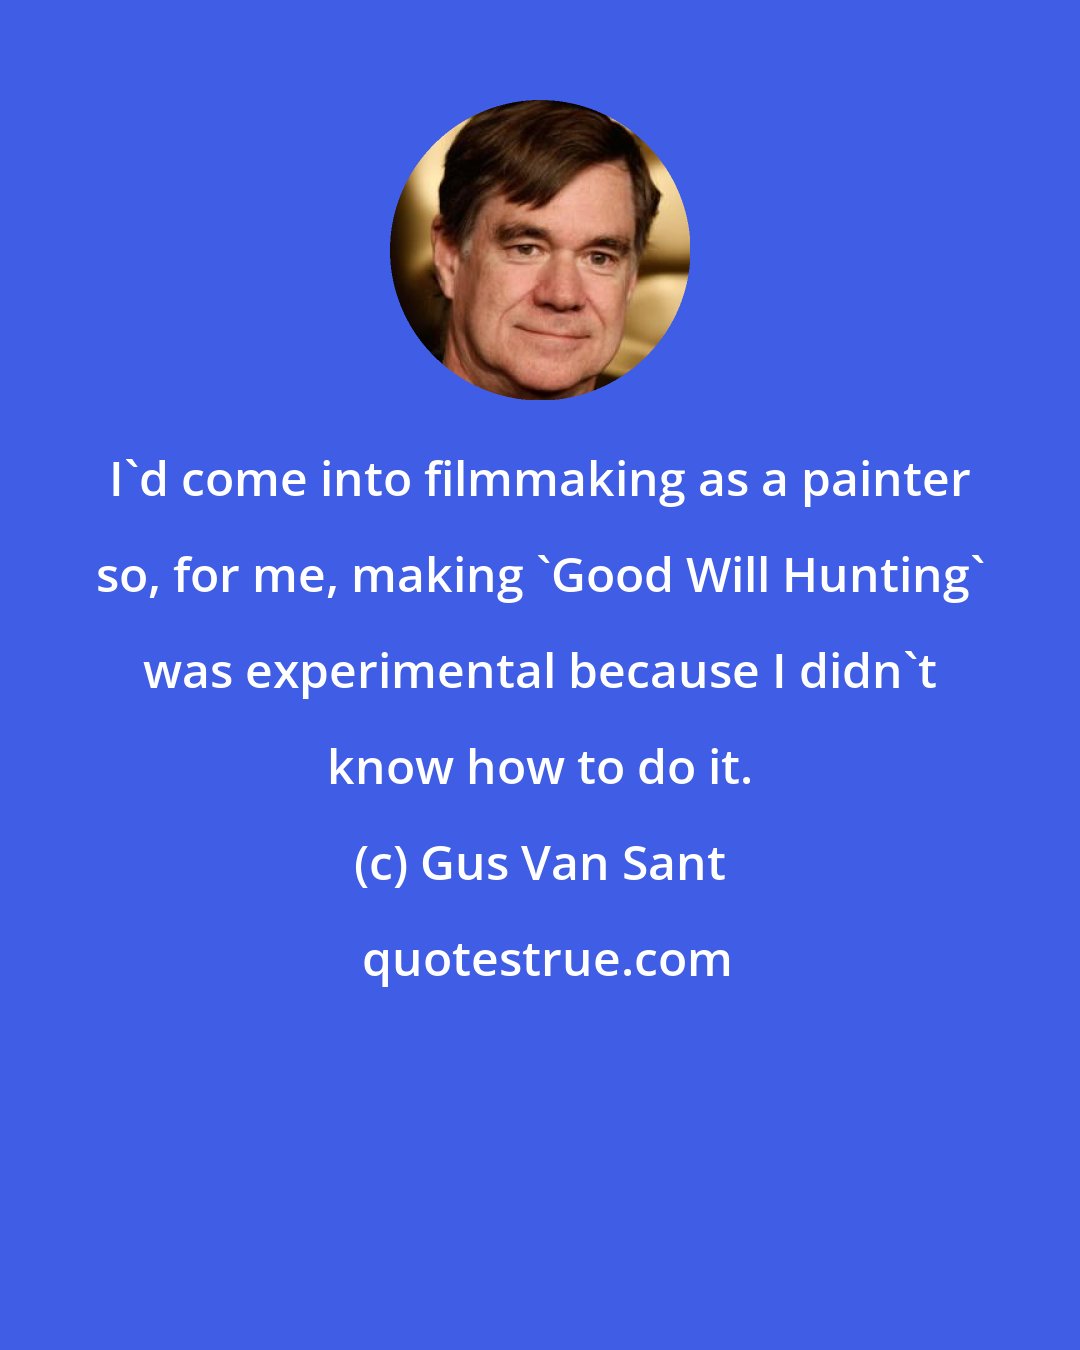 Gus Van Sant: I'd come into filmmaking as a painter so, for me, making 'Good Will Hunting' was experimental because I didn't know how to do it.